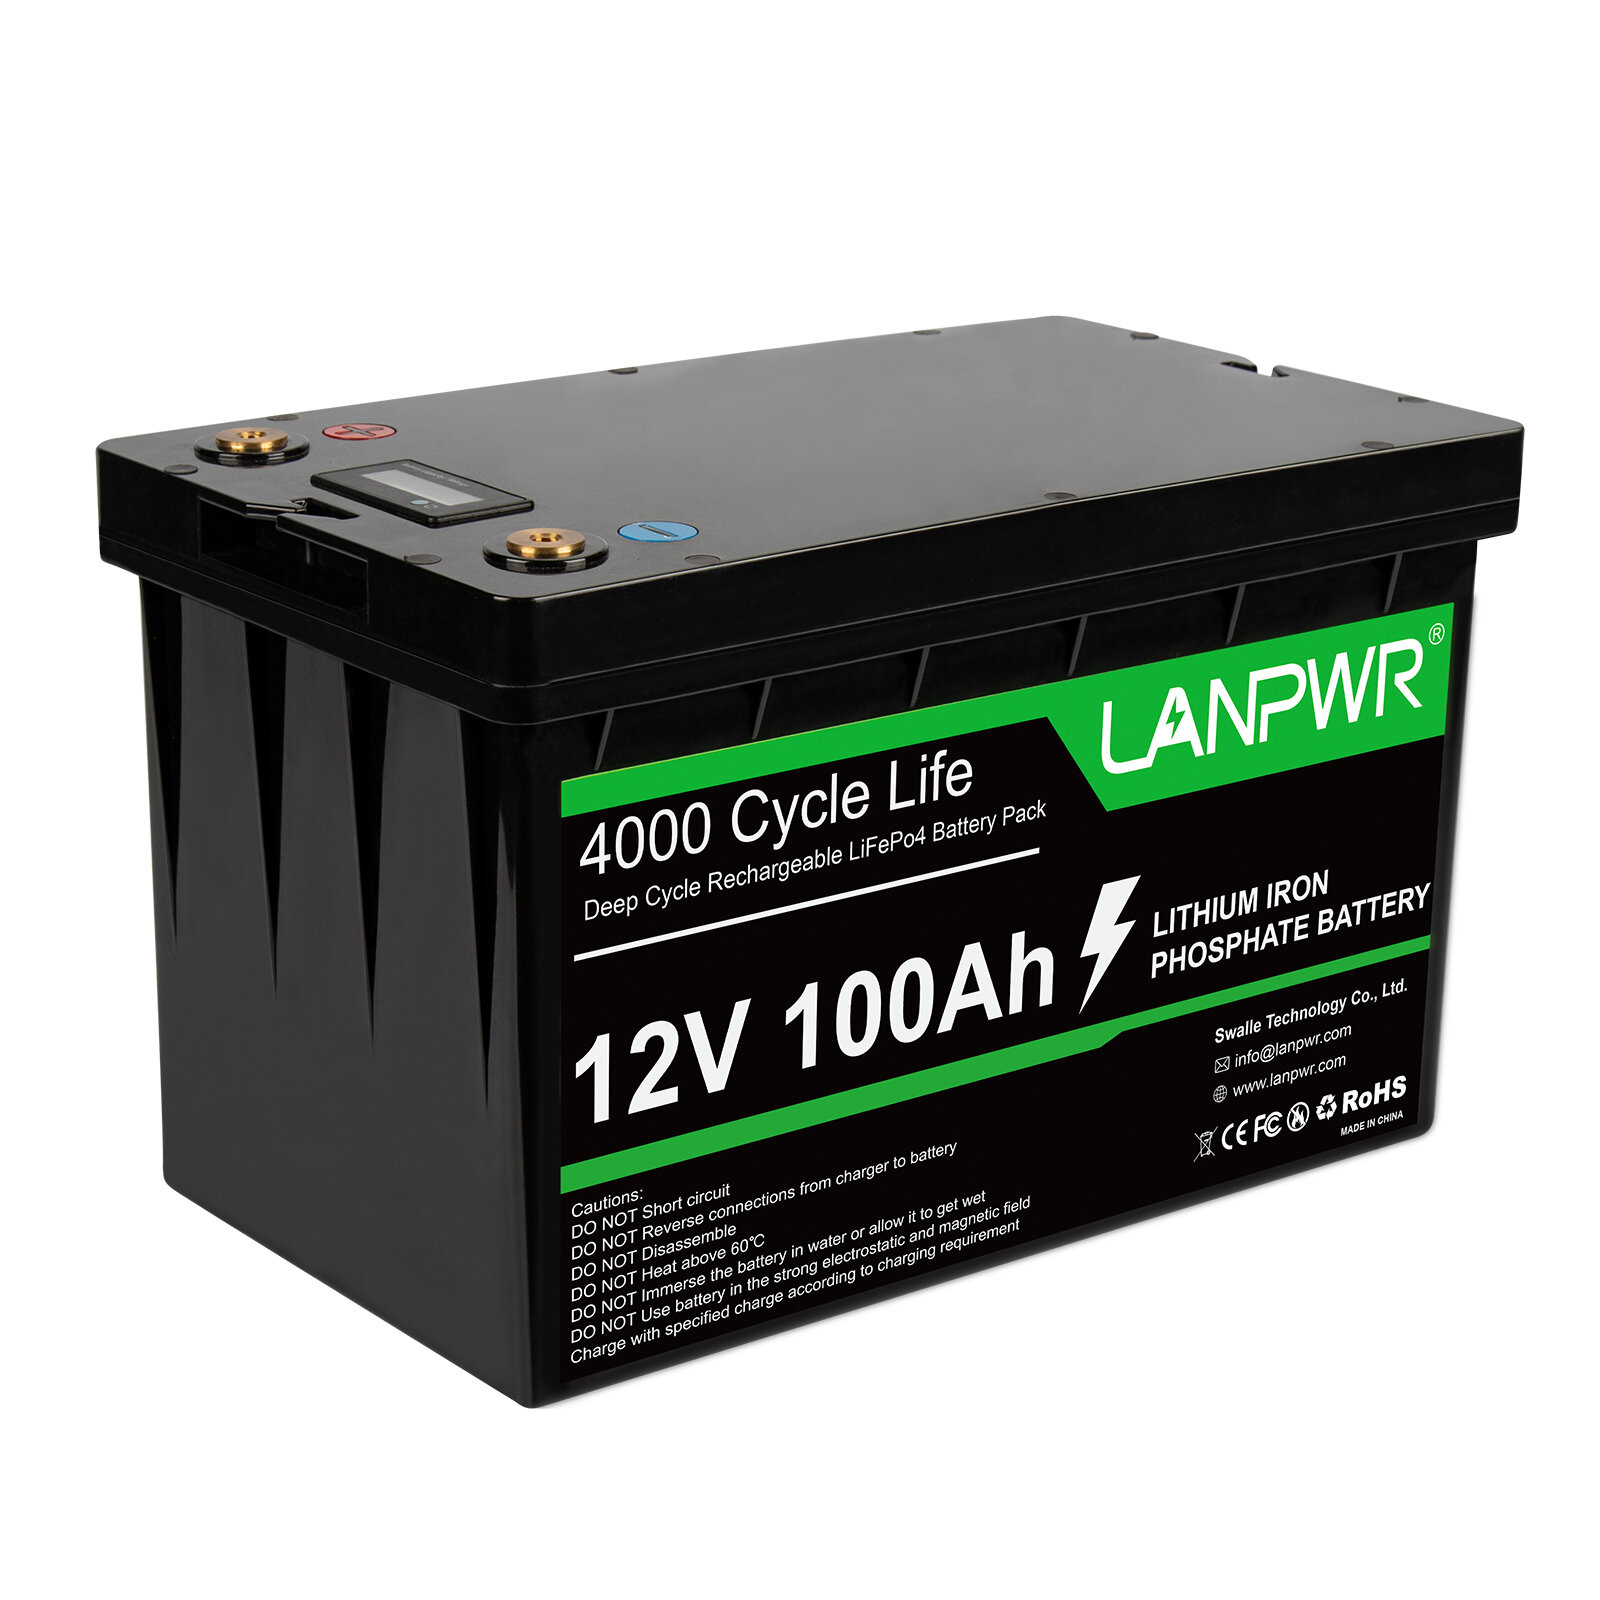 best price,lanpwr,12v,100ah,lifepo4,battery,pack,1280wh,eu,discount